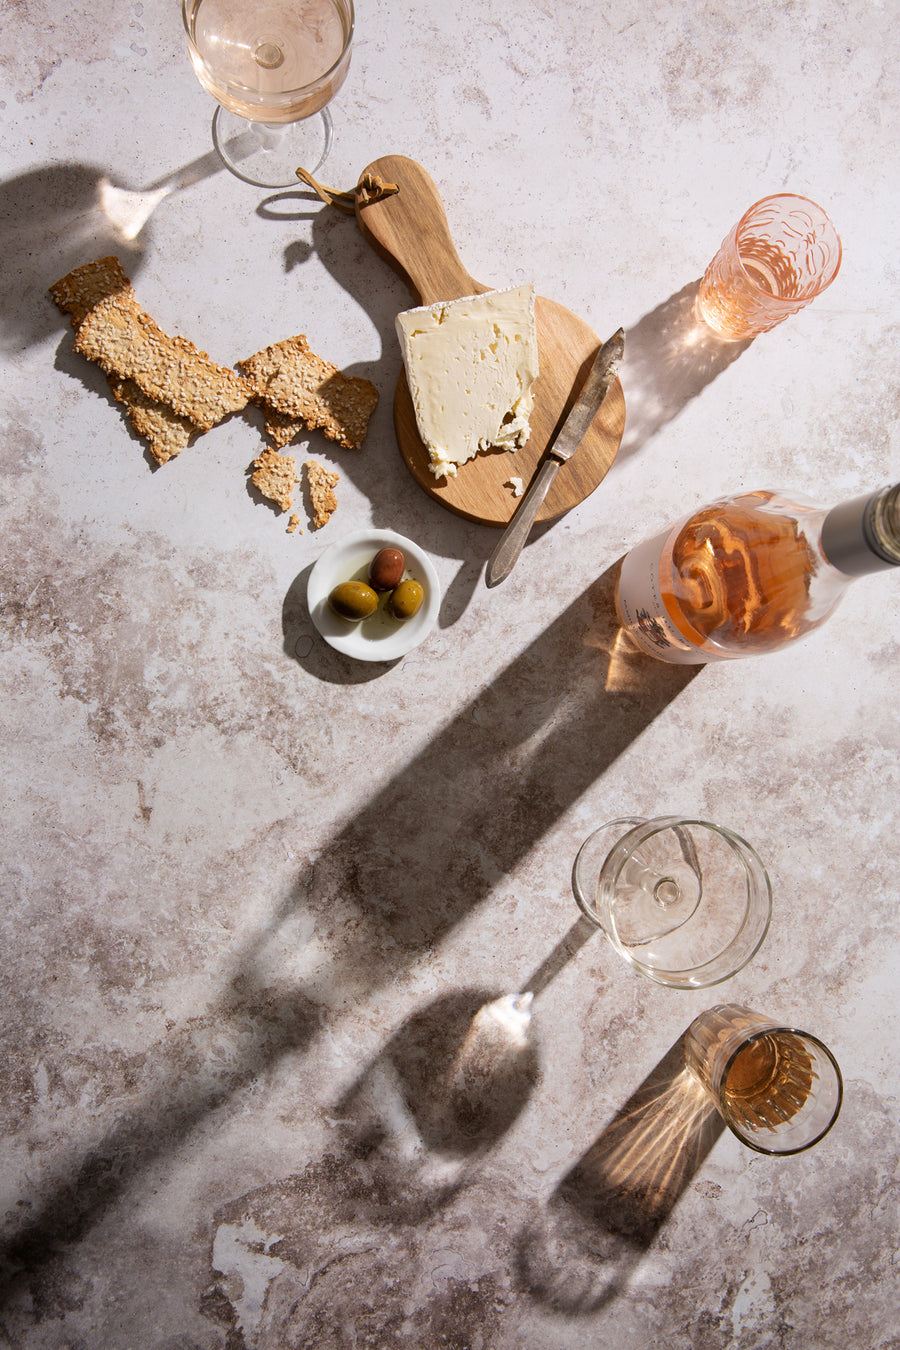 Phoenix Food Photography Background with cheese, crackers and wine